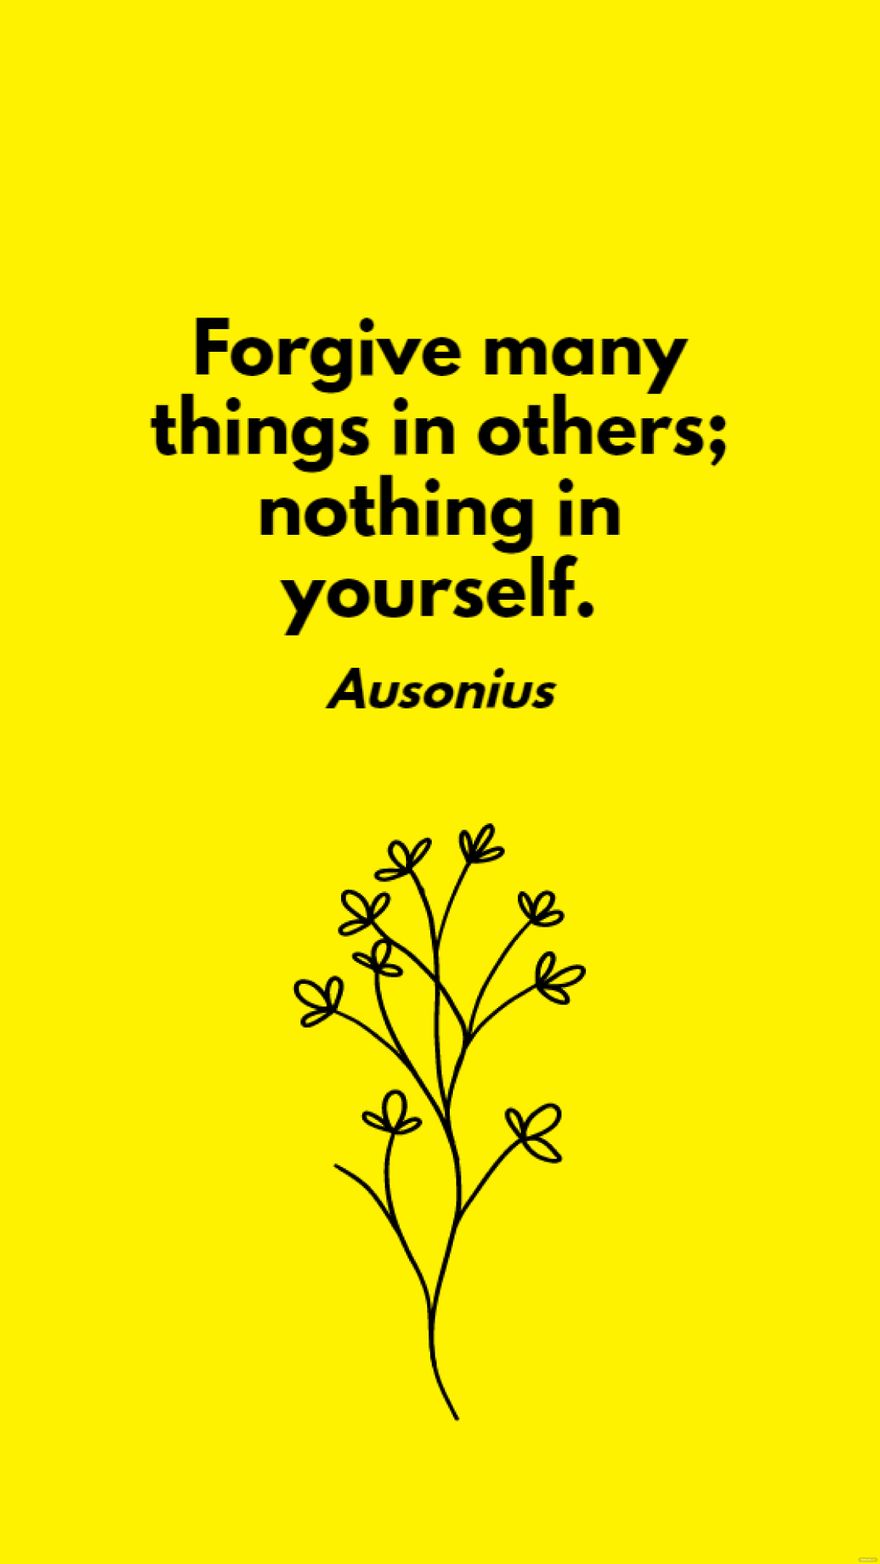 Ausonius - Forgive many things in others; nothing in yourself.